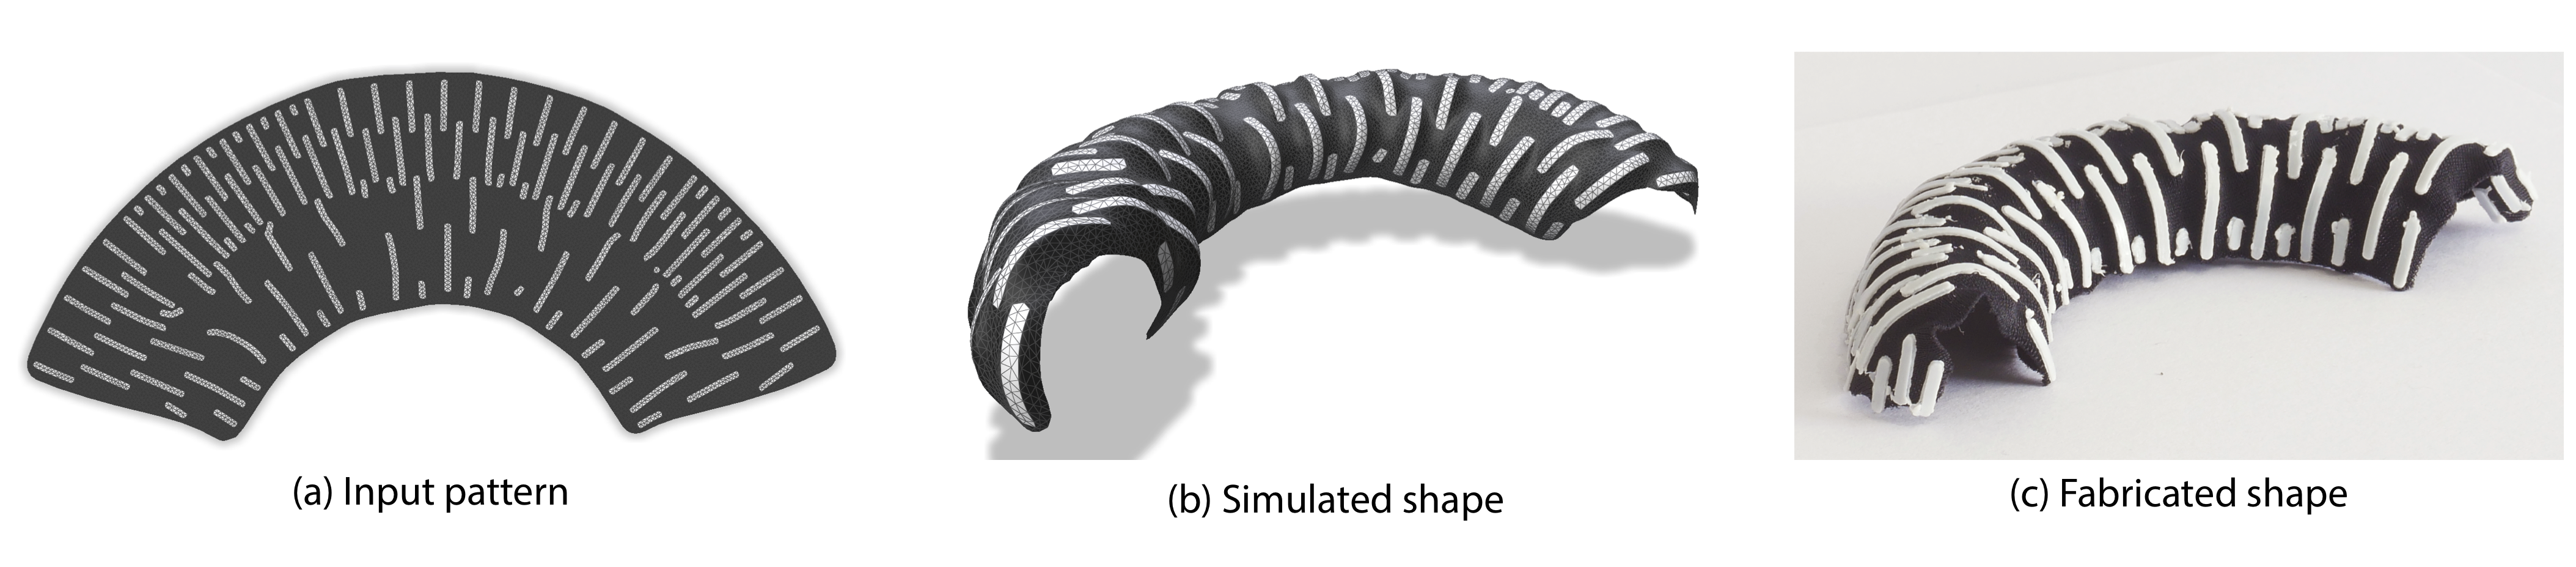 Simulation of printed-on-fabric assemblies